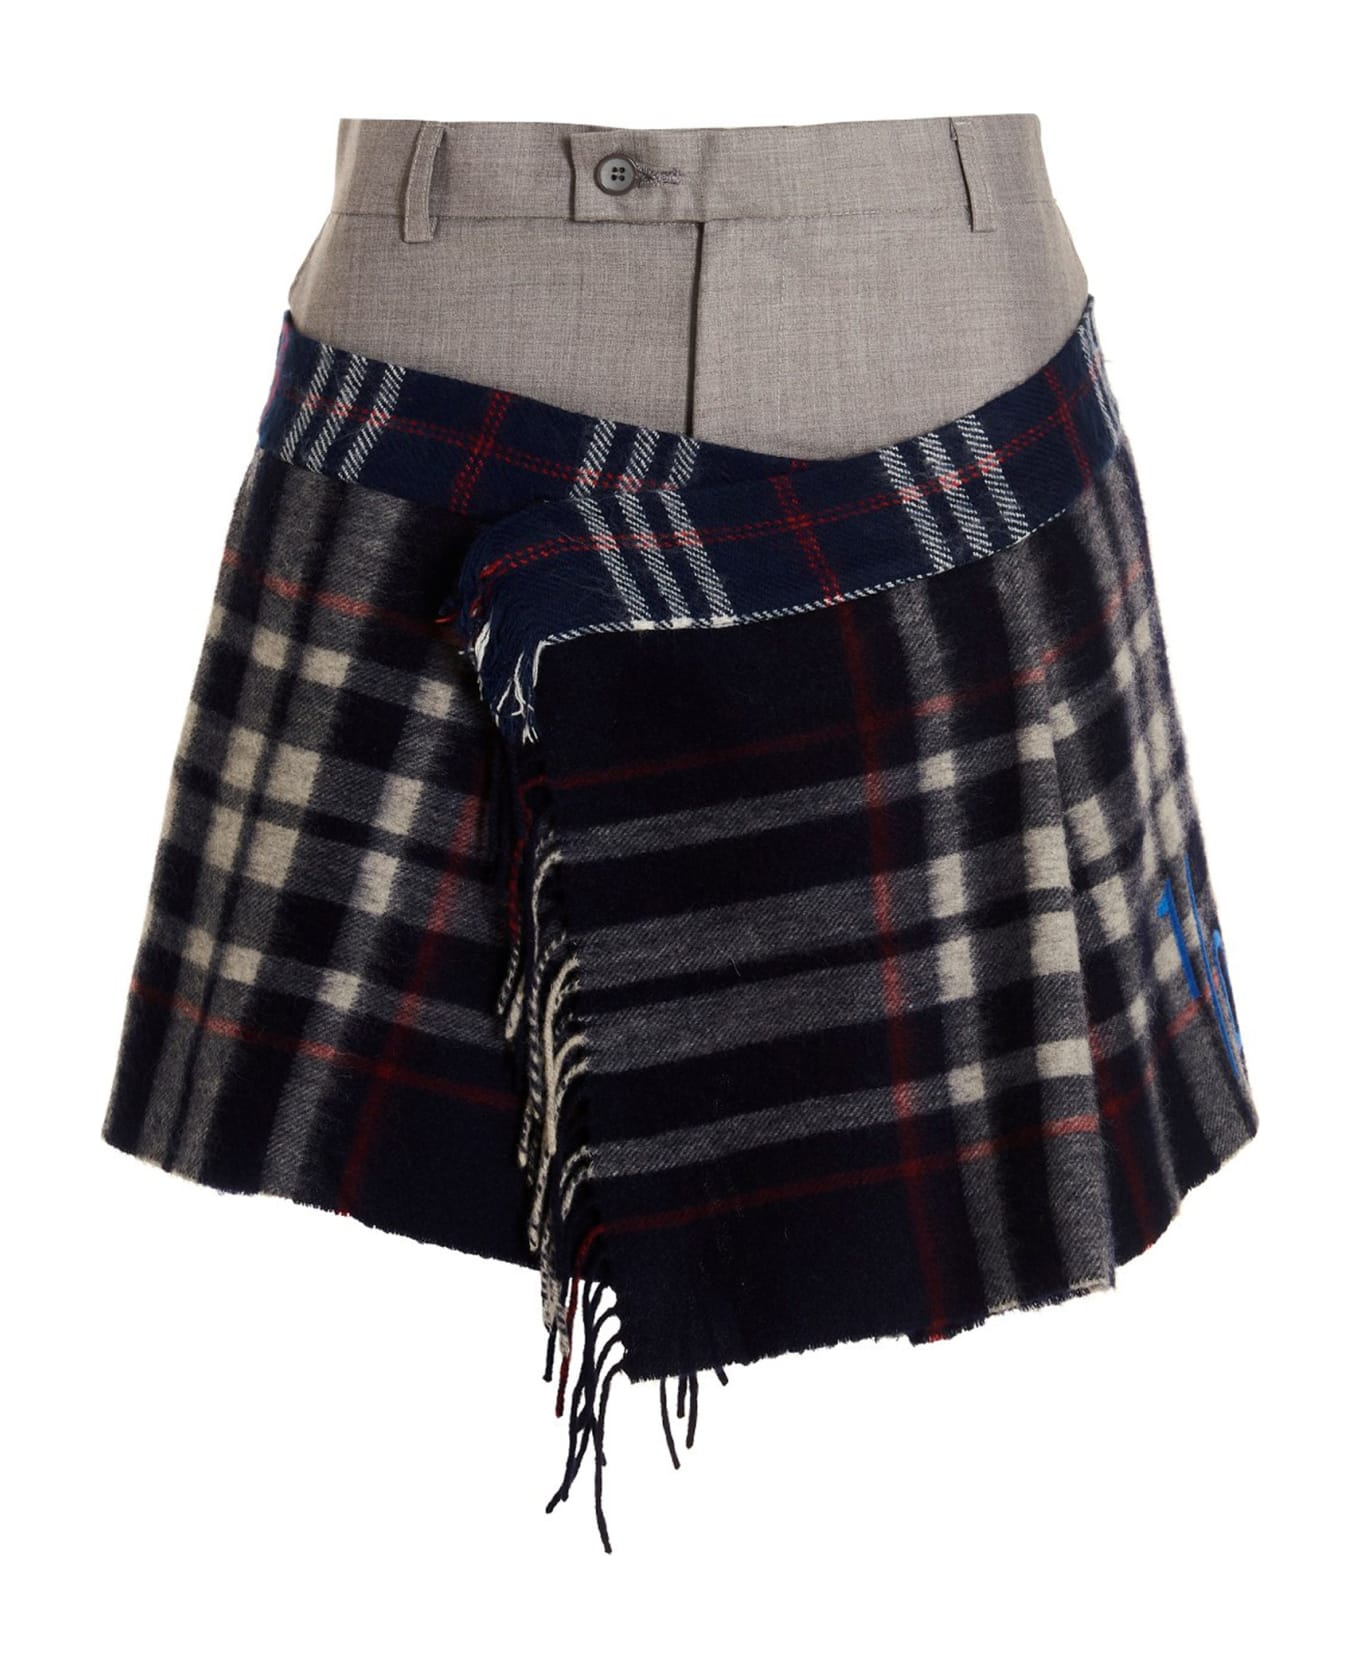 1/OFF 'check Scarf Reworked' Skirt - Multicolor スカート